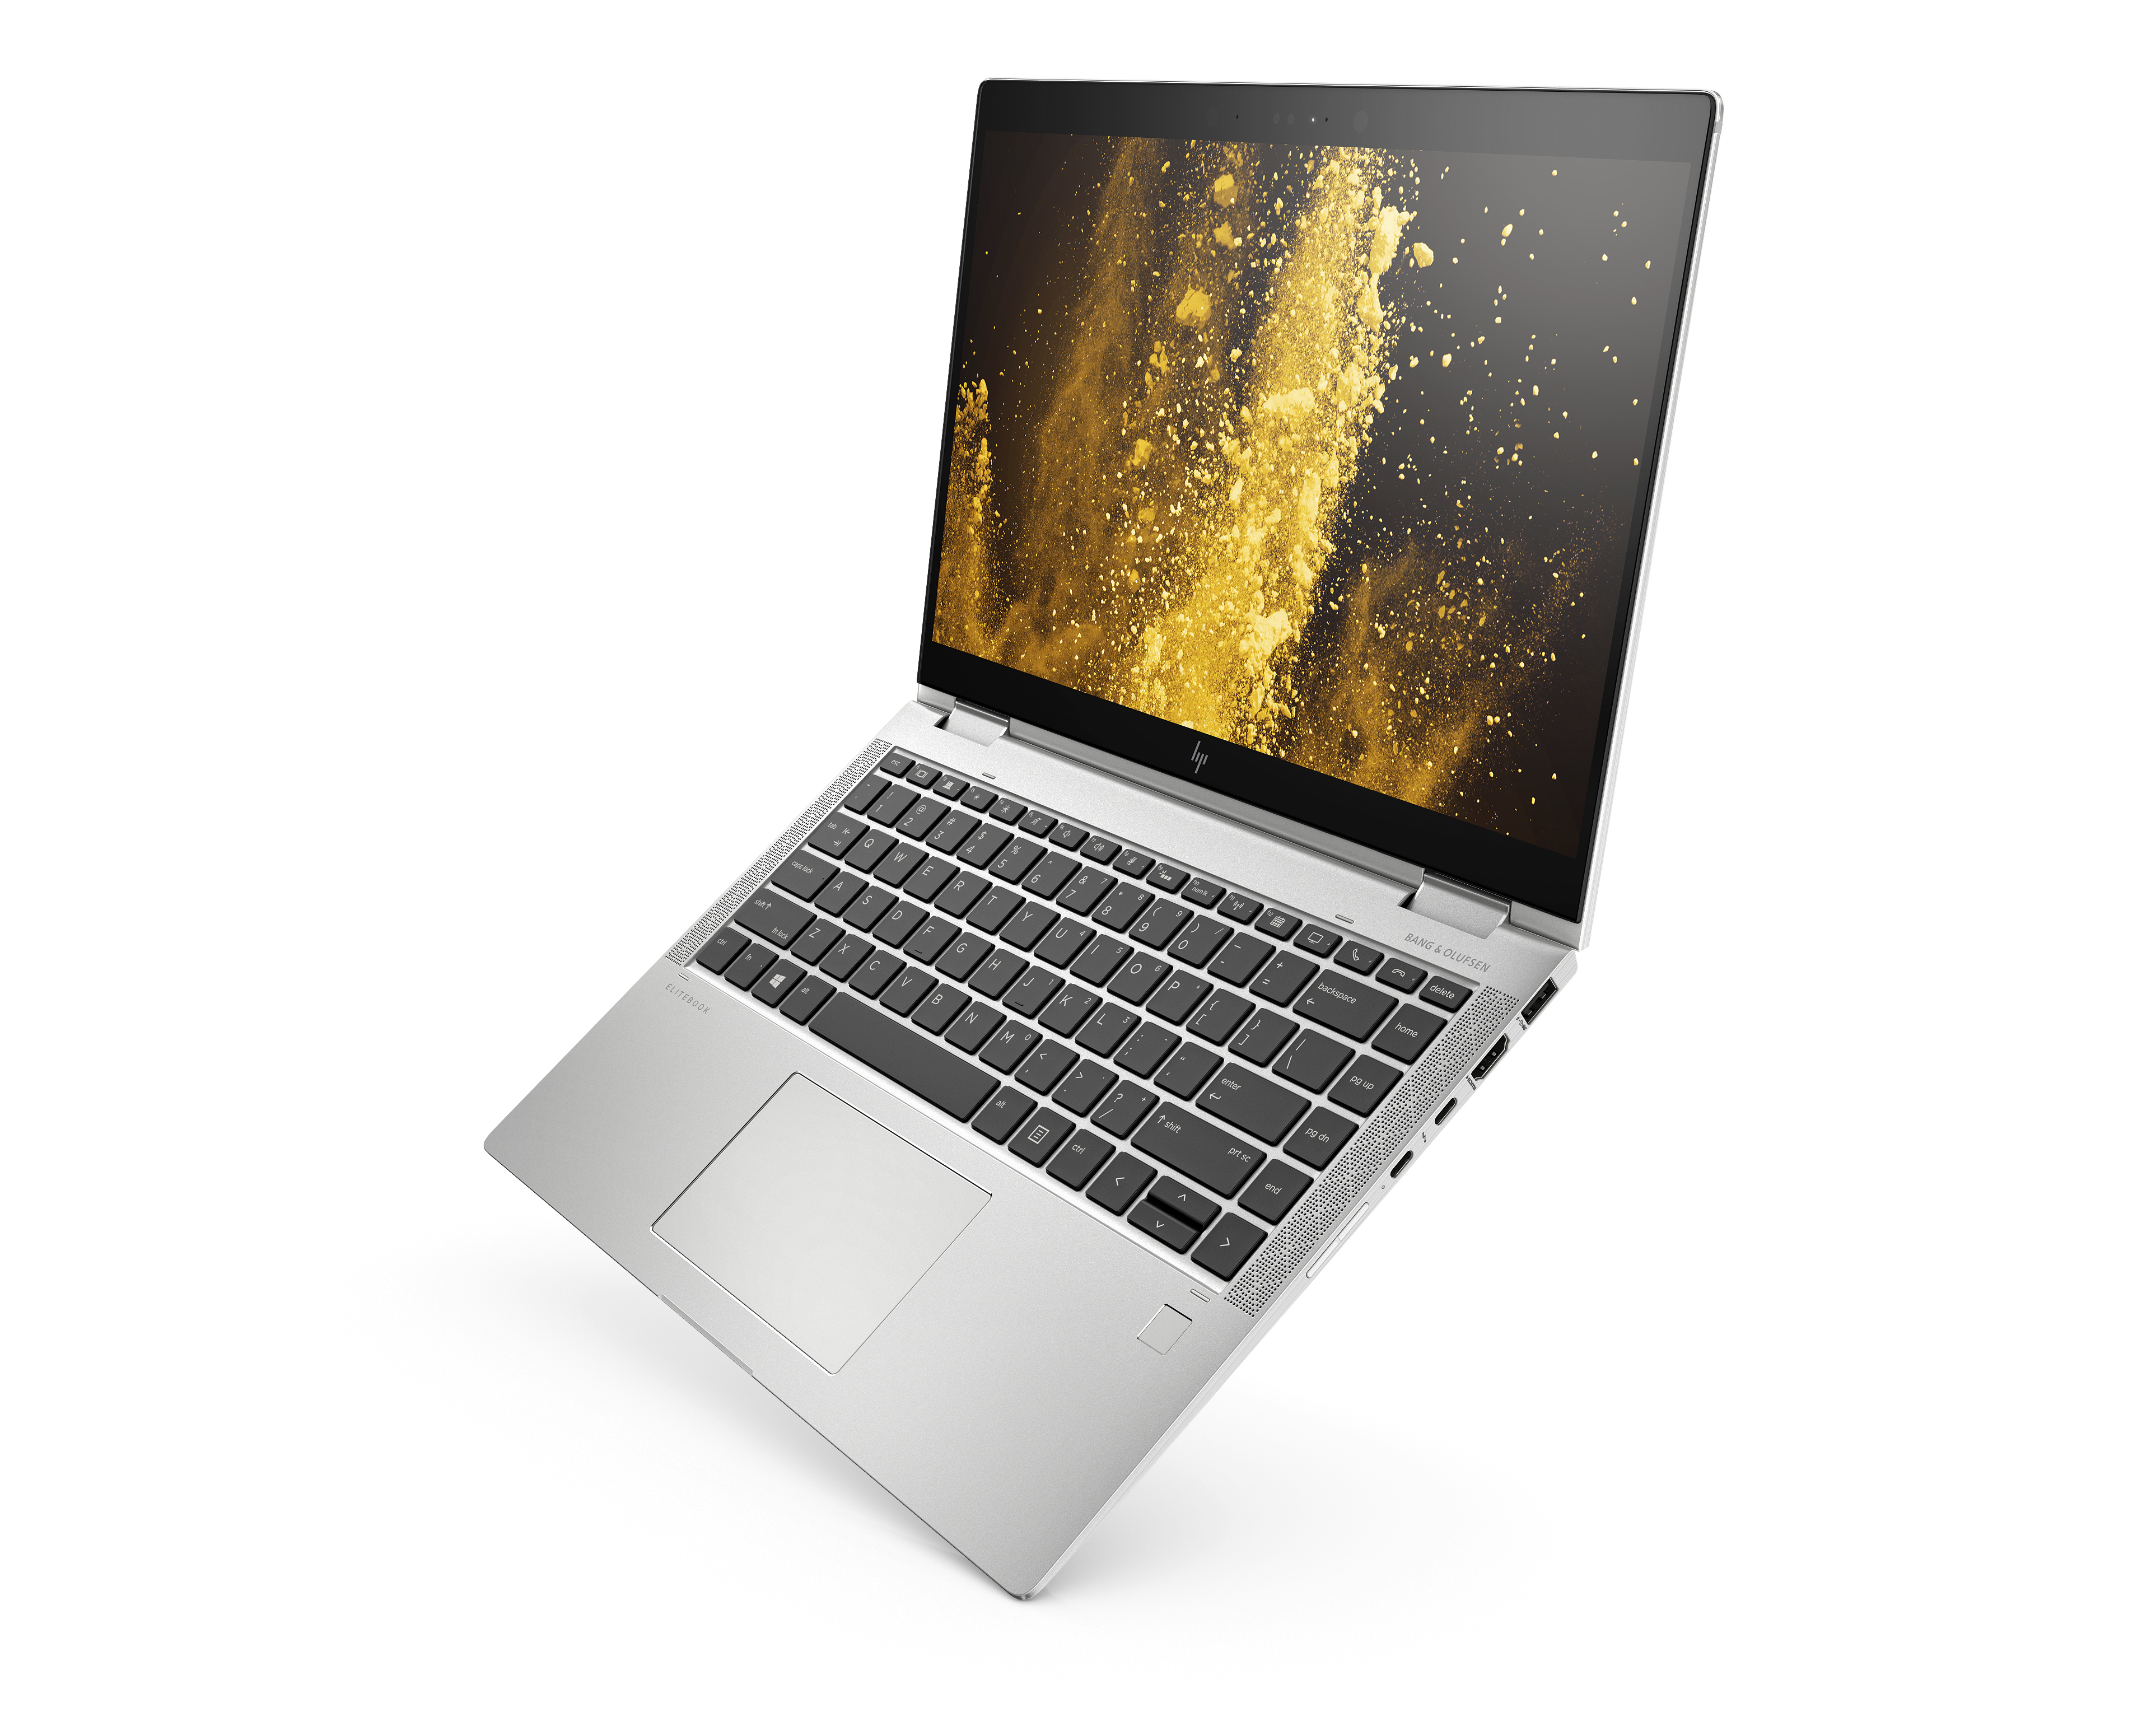 HP updates Spectre x360 2-in-1s with webcam privacy switch, more